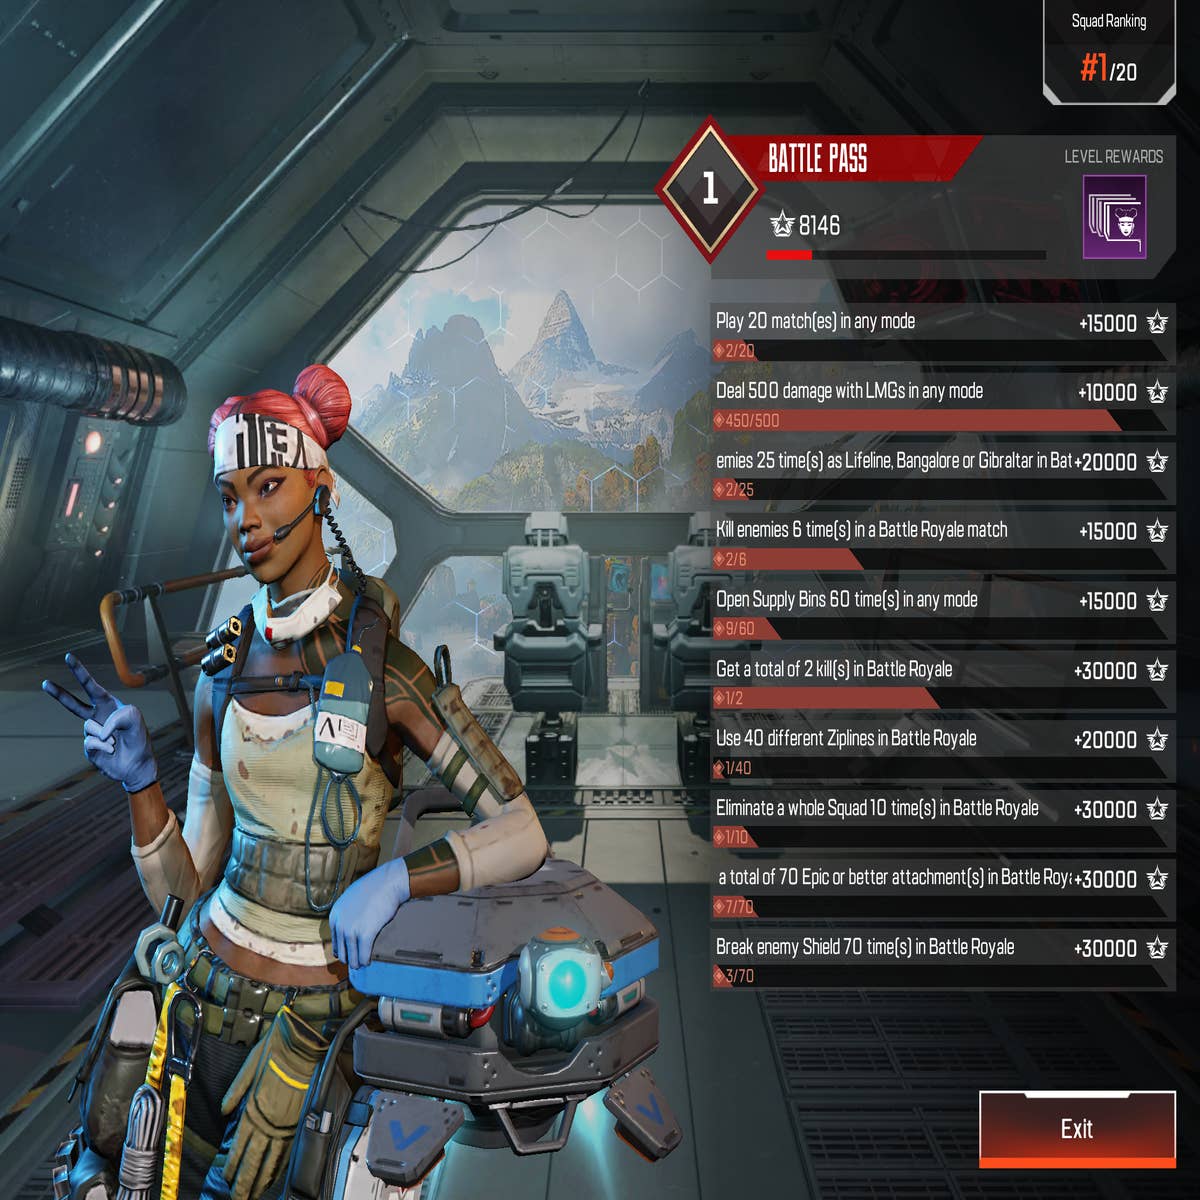 Apex Legends Mobile Game Review: Tricky But Fun!